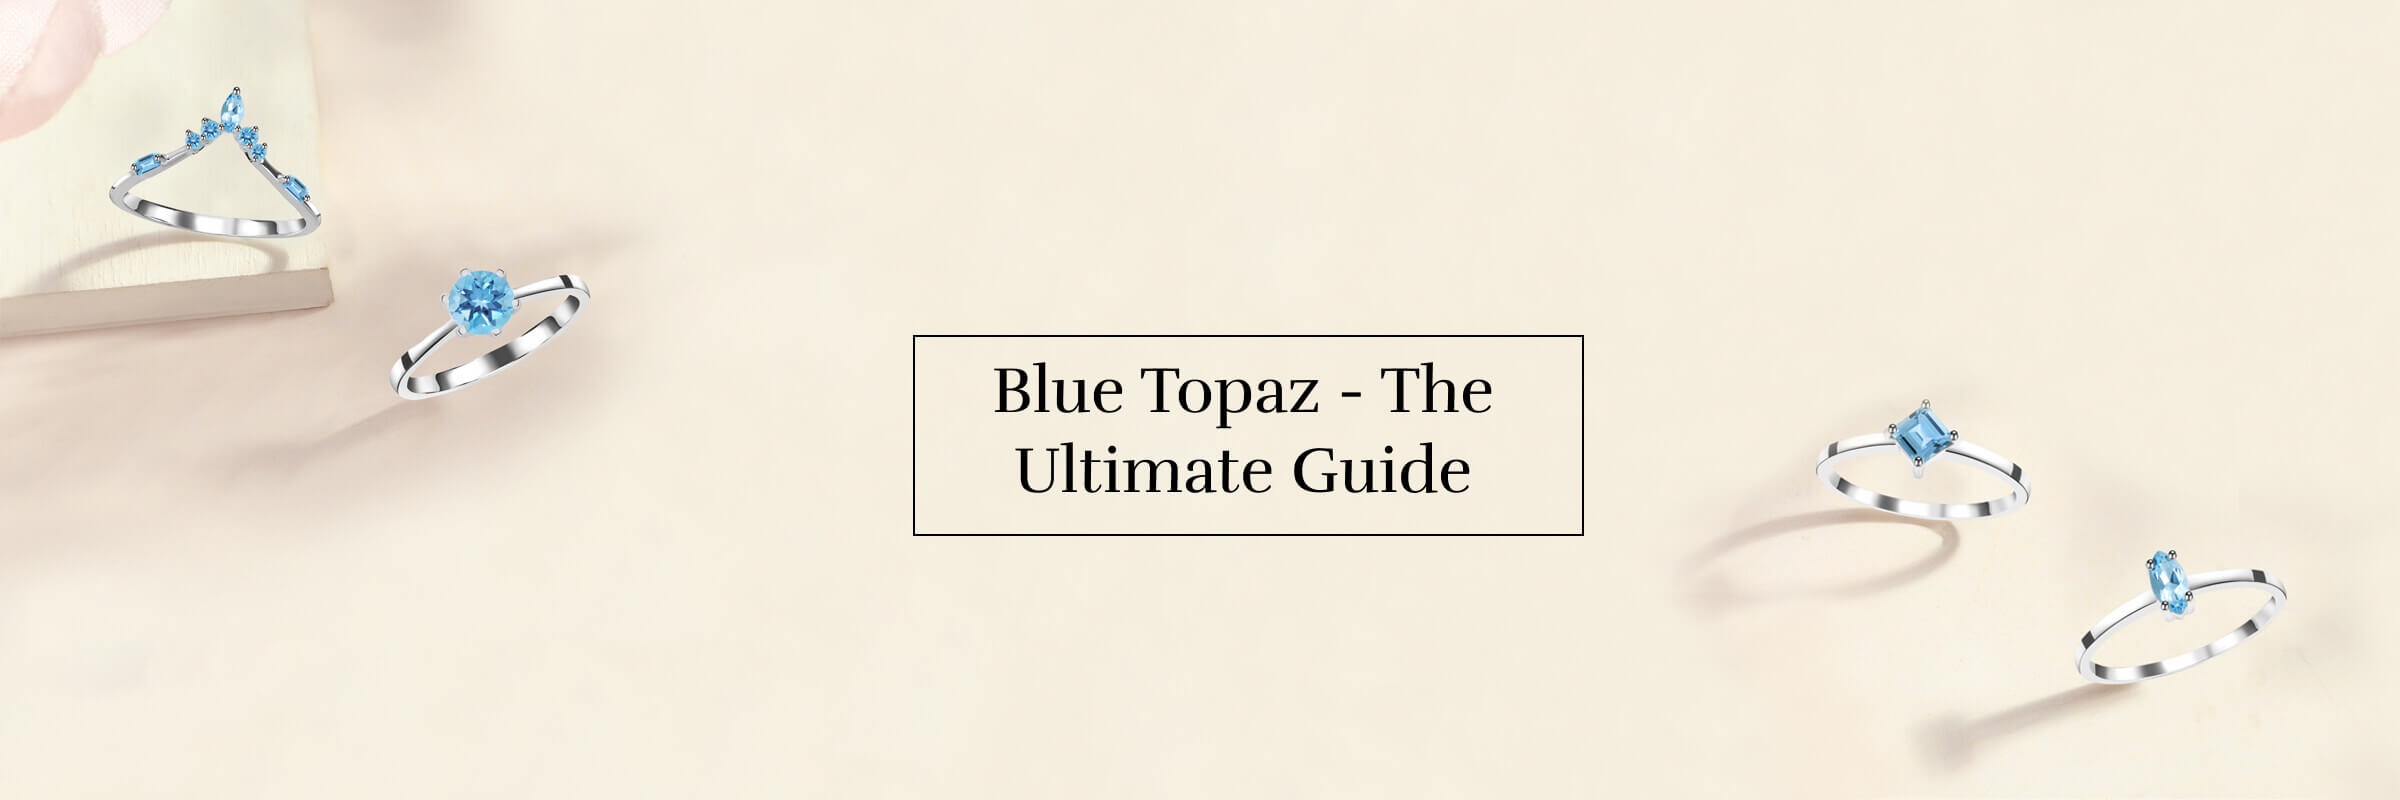 Blue Topaz Meaning & Uses - The Ultimate Guide 1